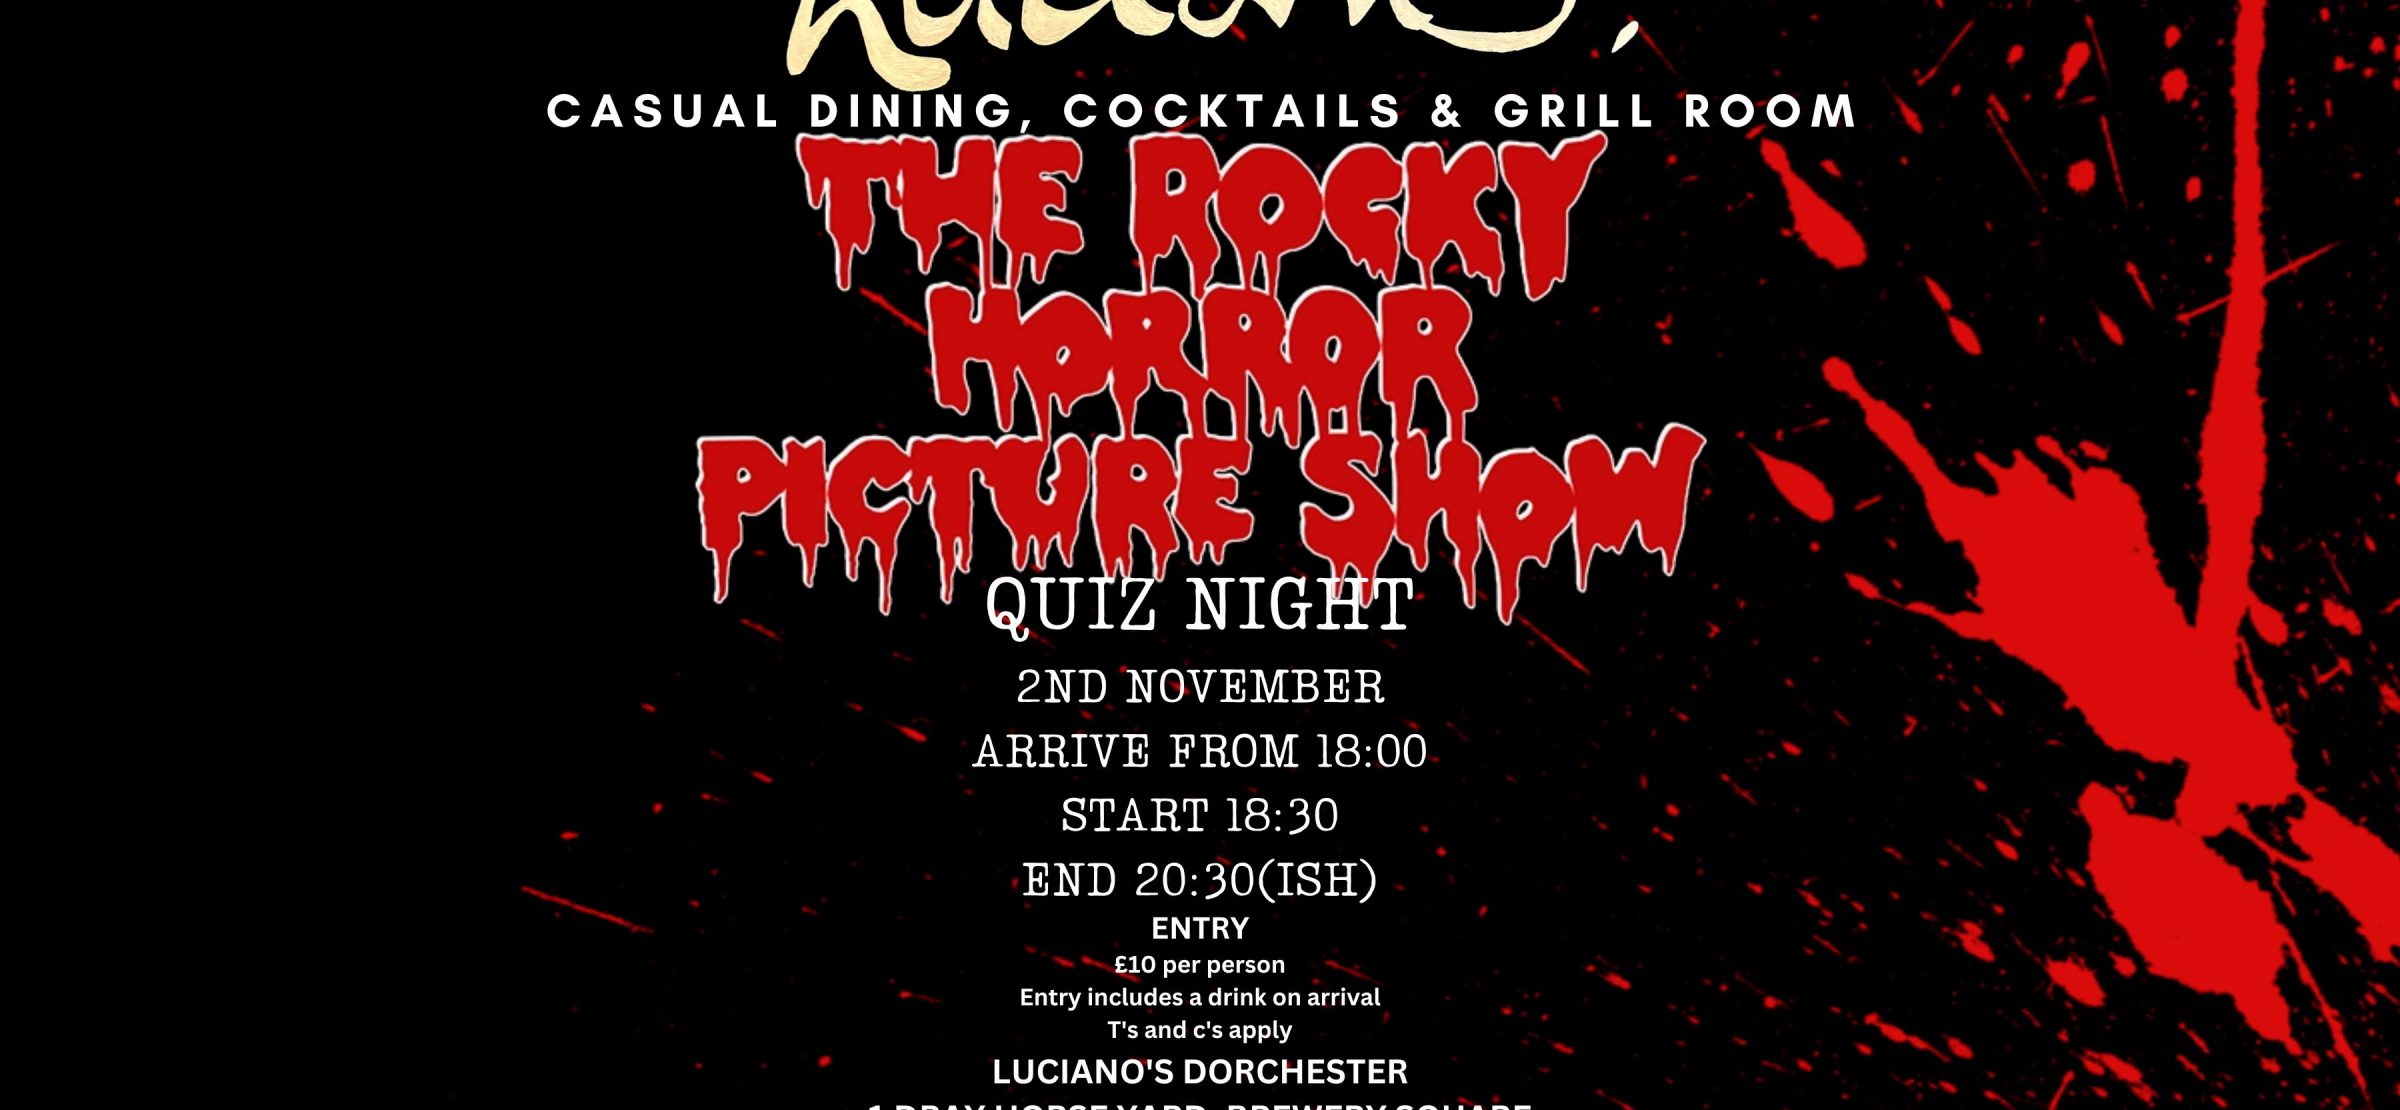 Rocky Horror picture show quiz night